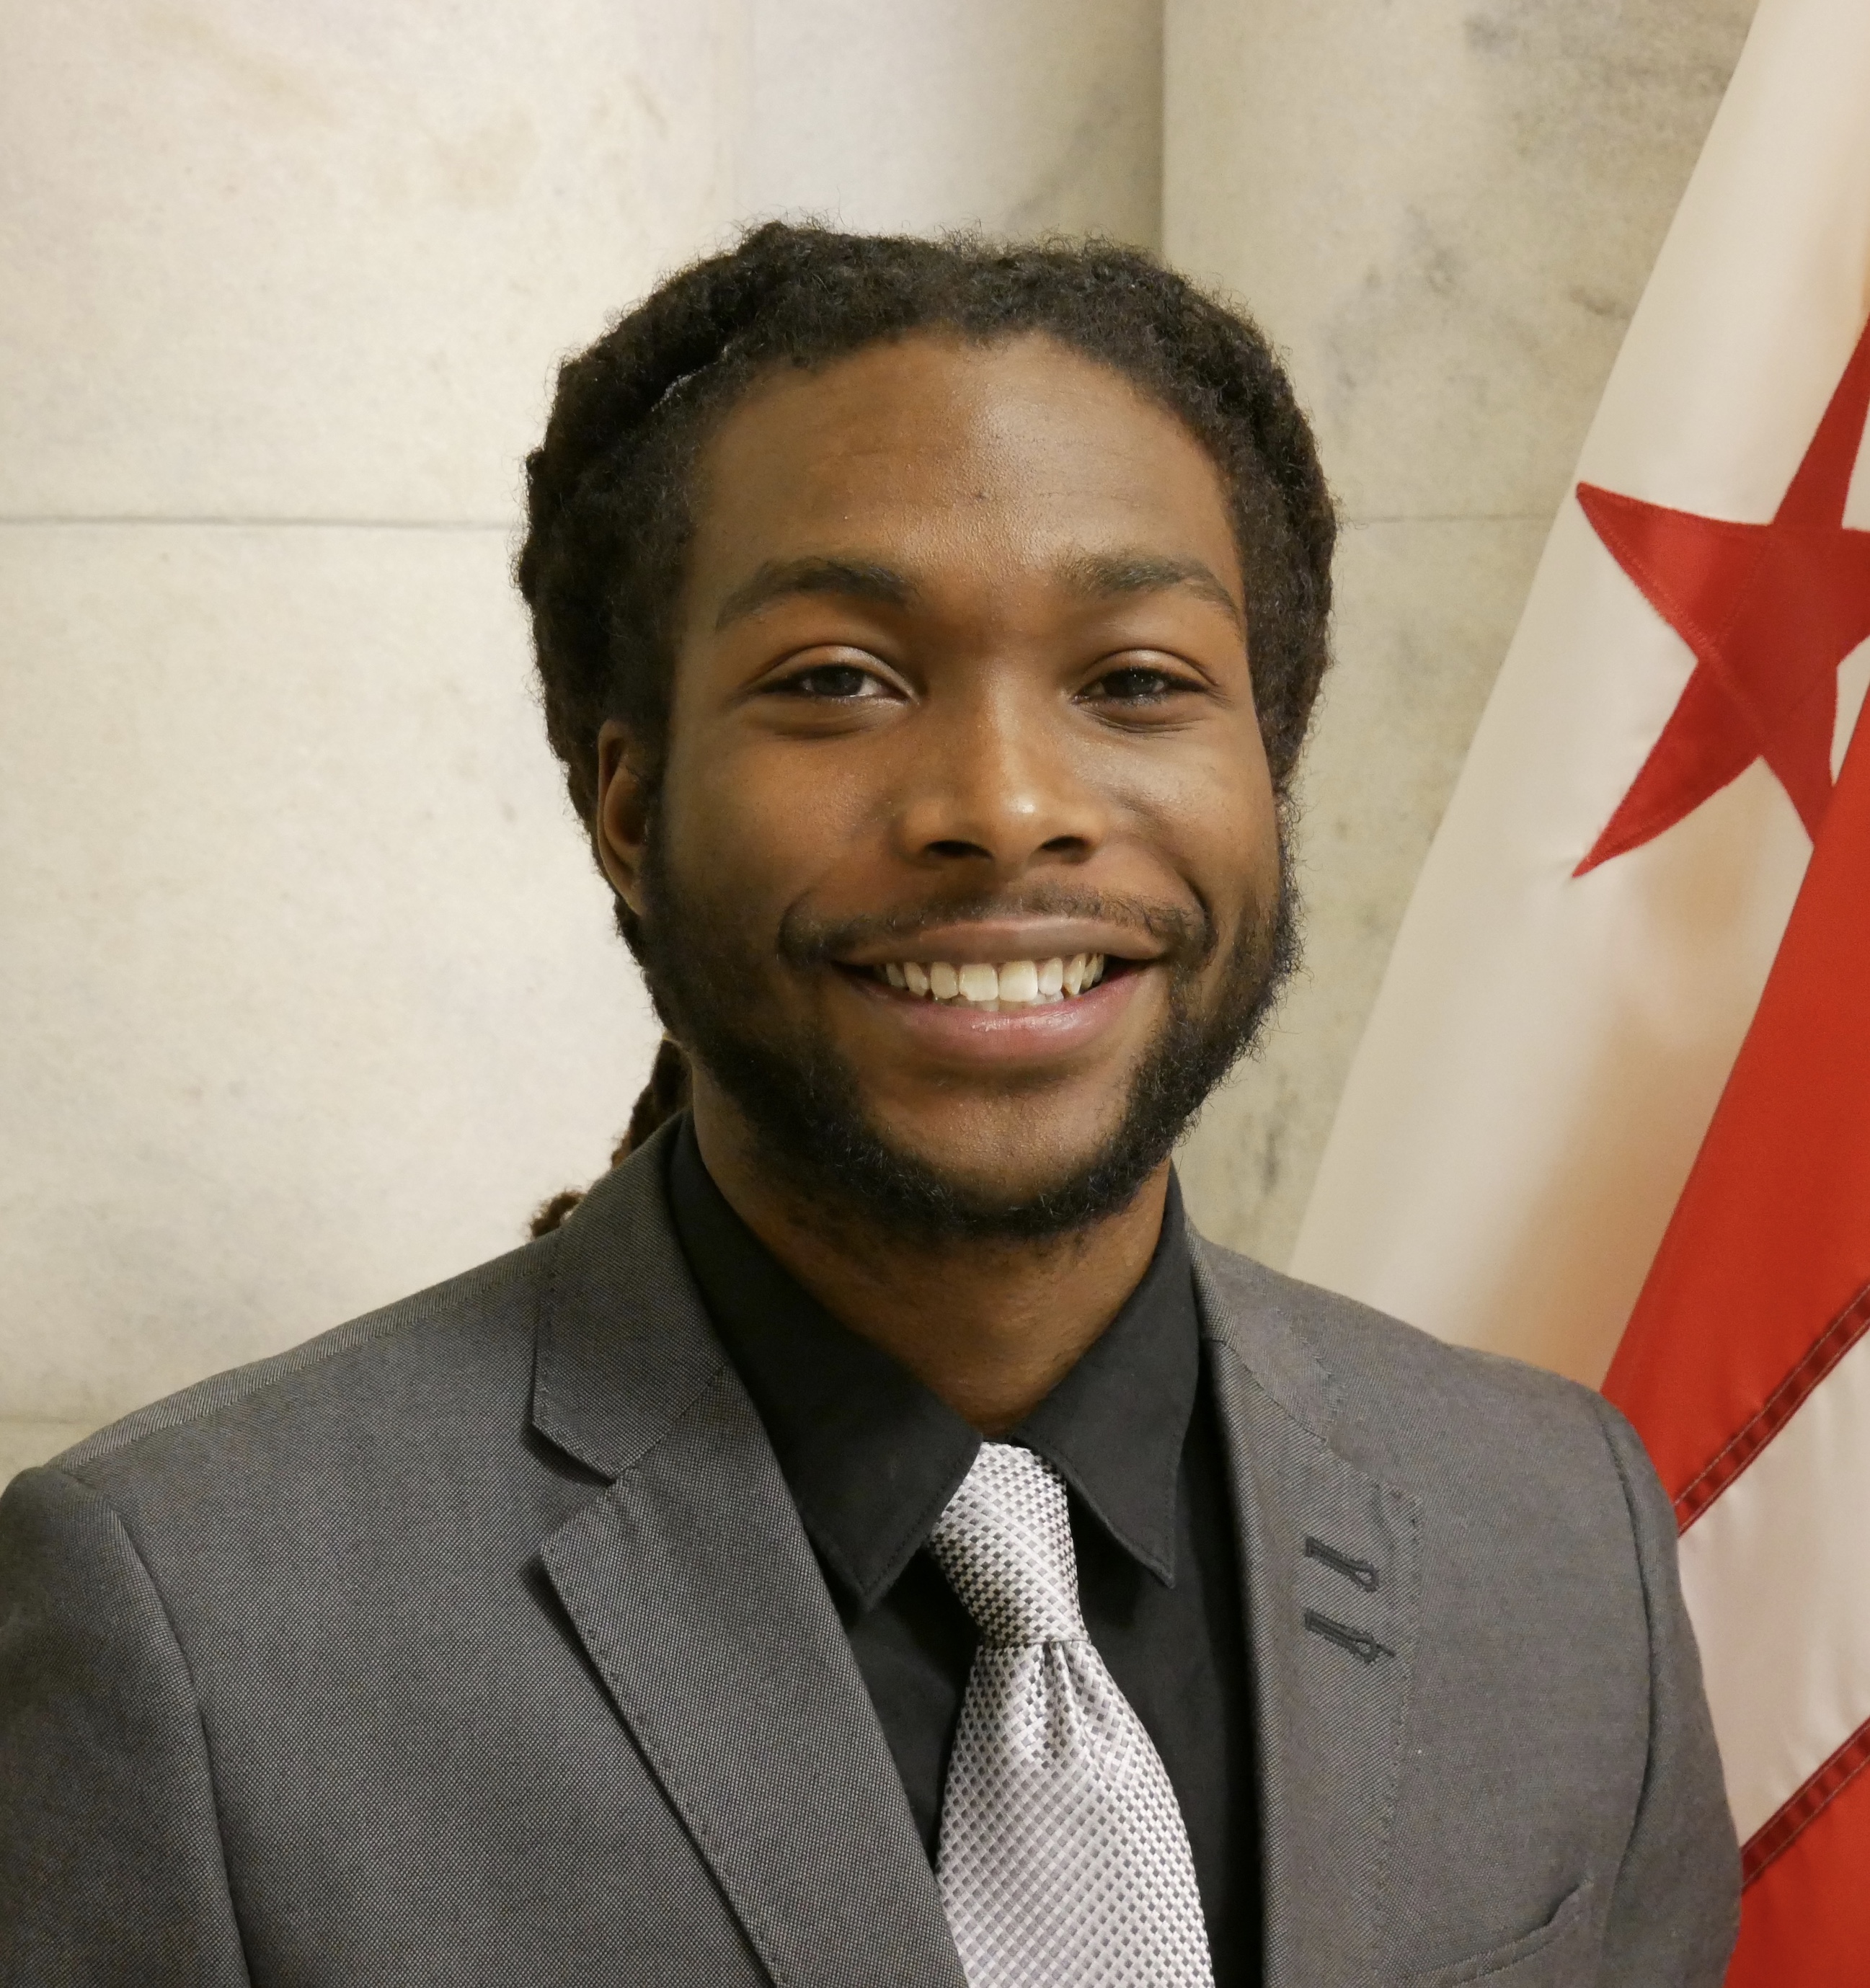 DayVon Fuller smiling, stands in front of a D.C. flag, wearing a gray suit and tie.